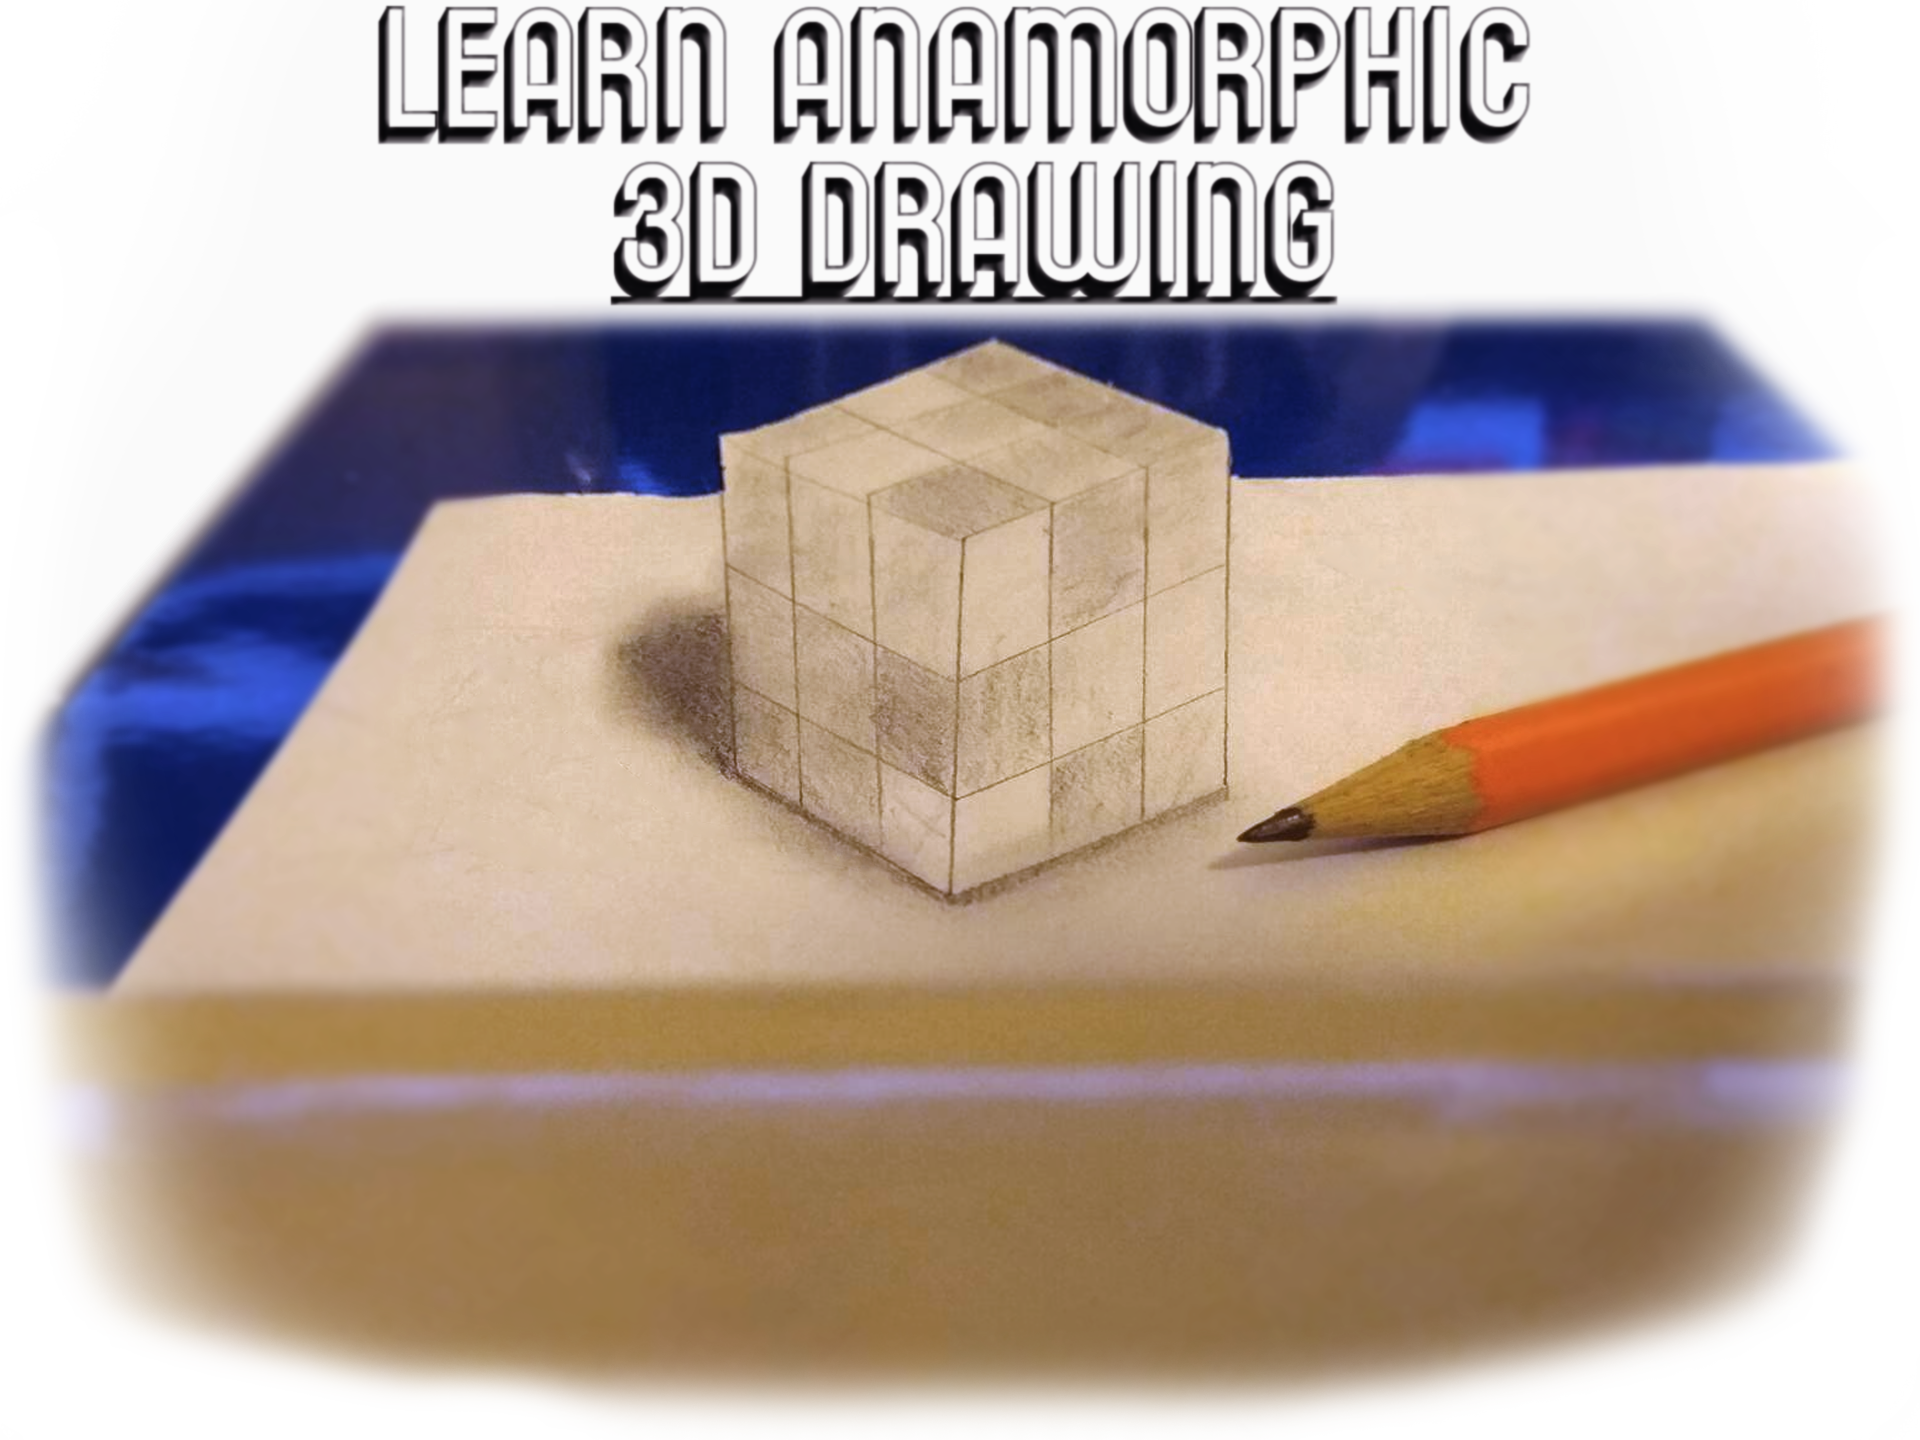 How to draw in 3d news Learn Anamorphic 3D Drawing IndieDB